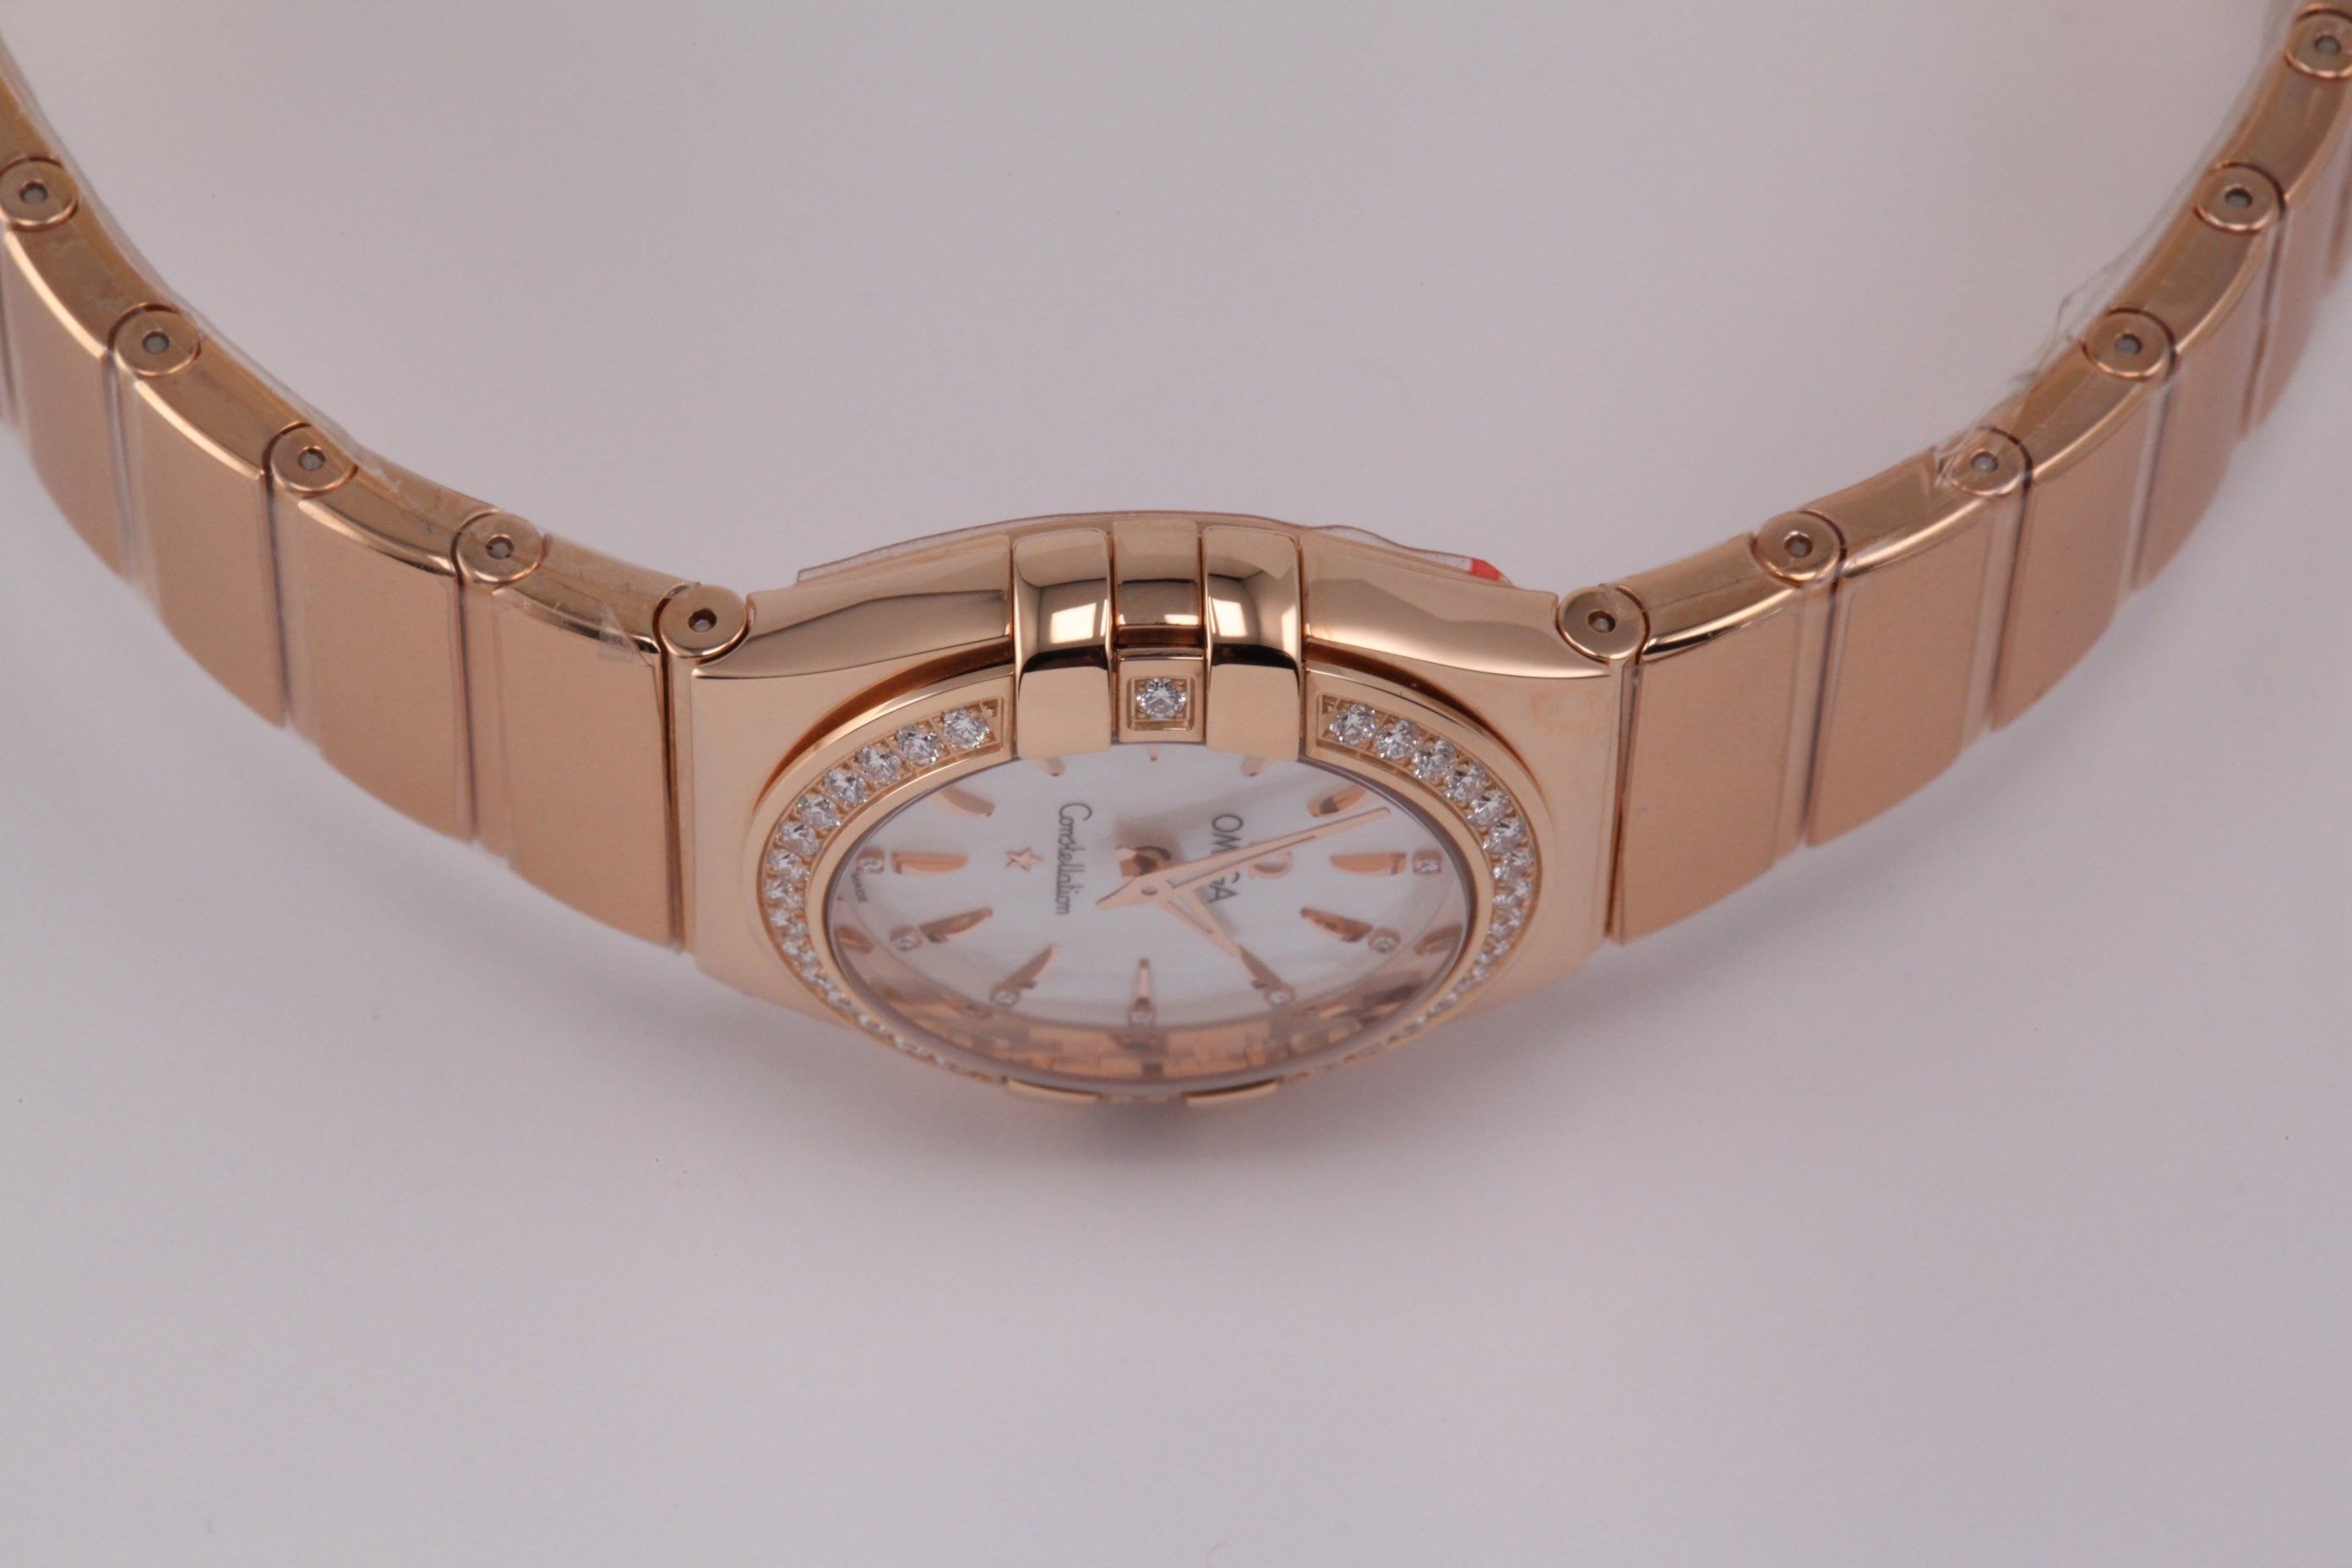 omega constellation ladies watch with diamonds